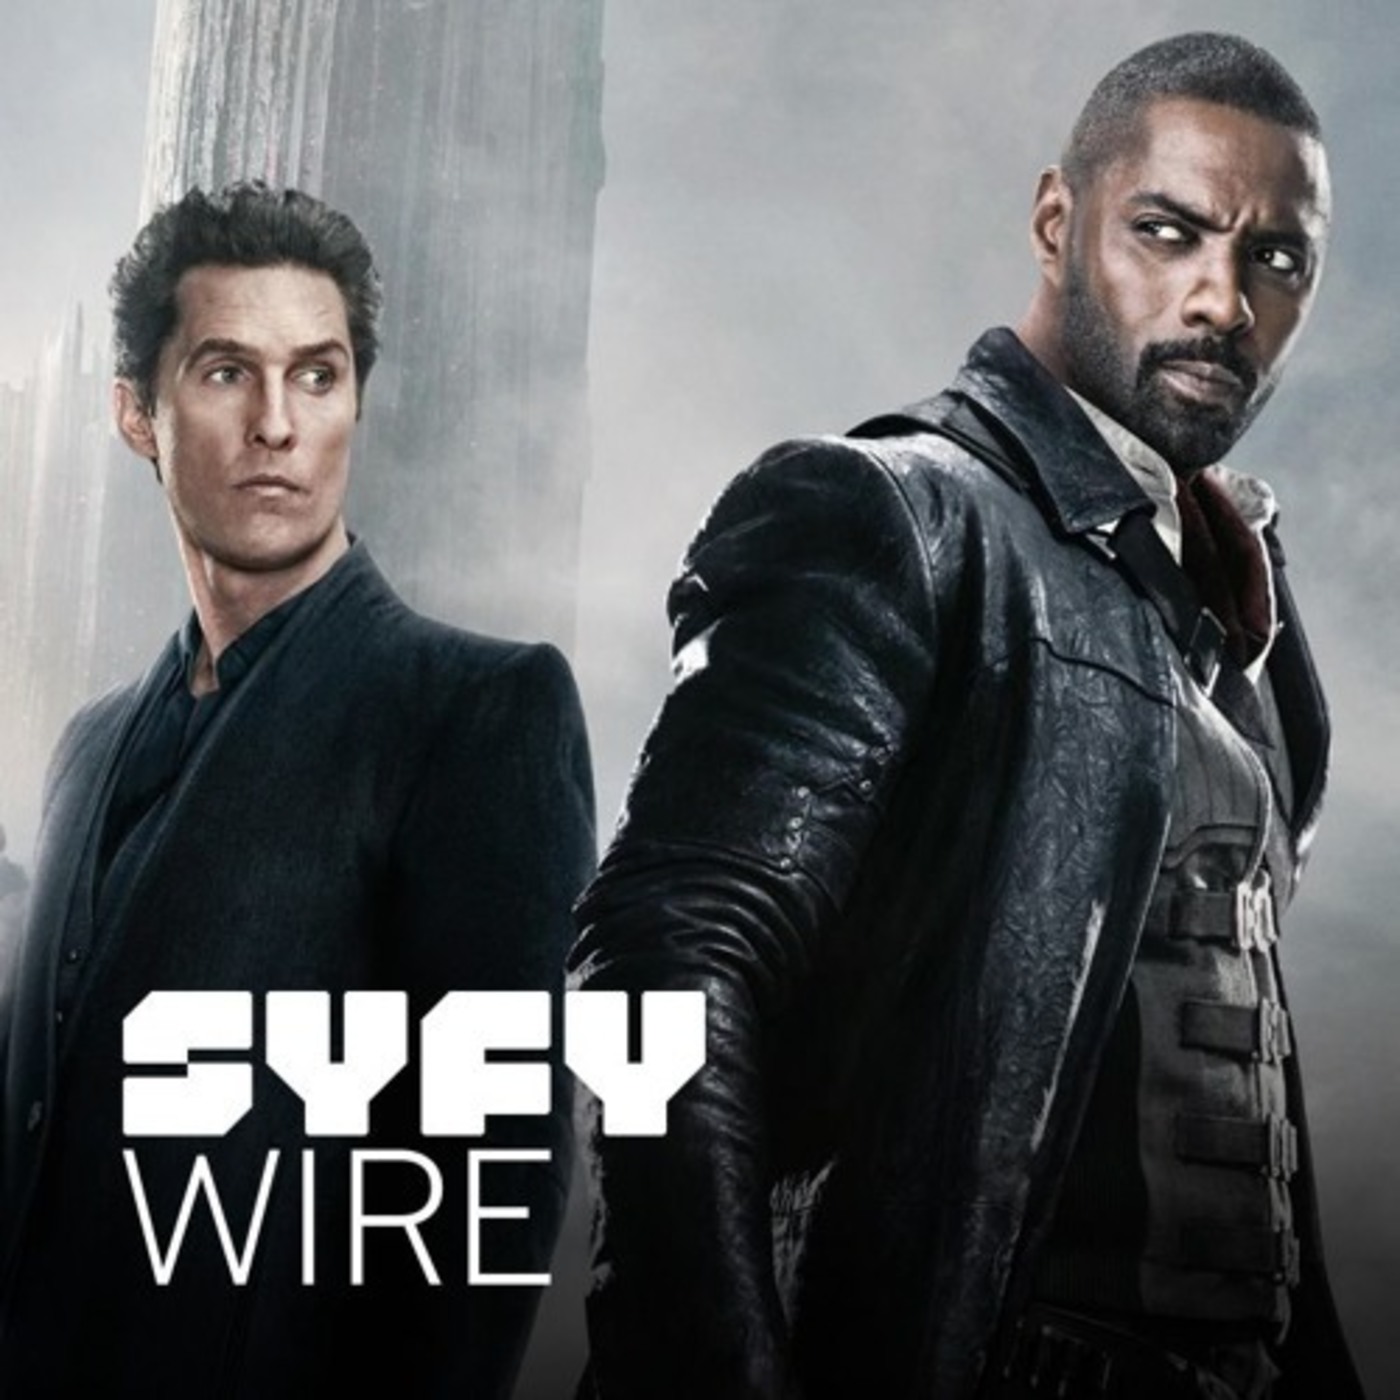 Who Won the Week Episode 87: The Dark Tower by Syfy Wire